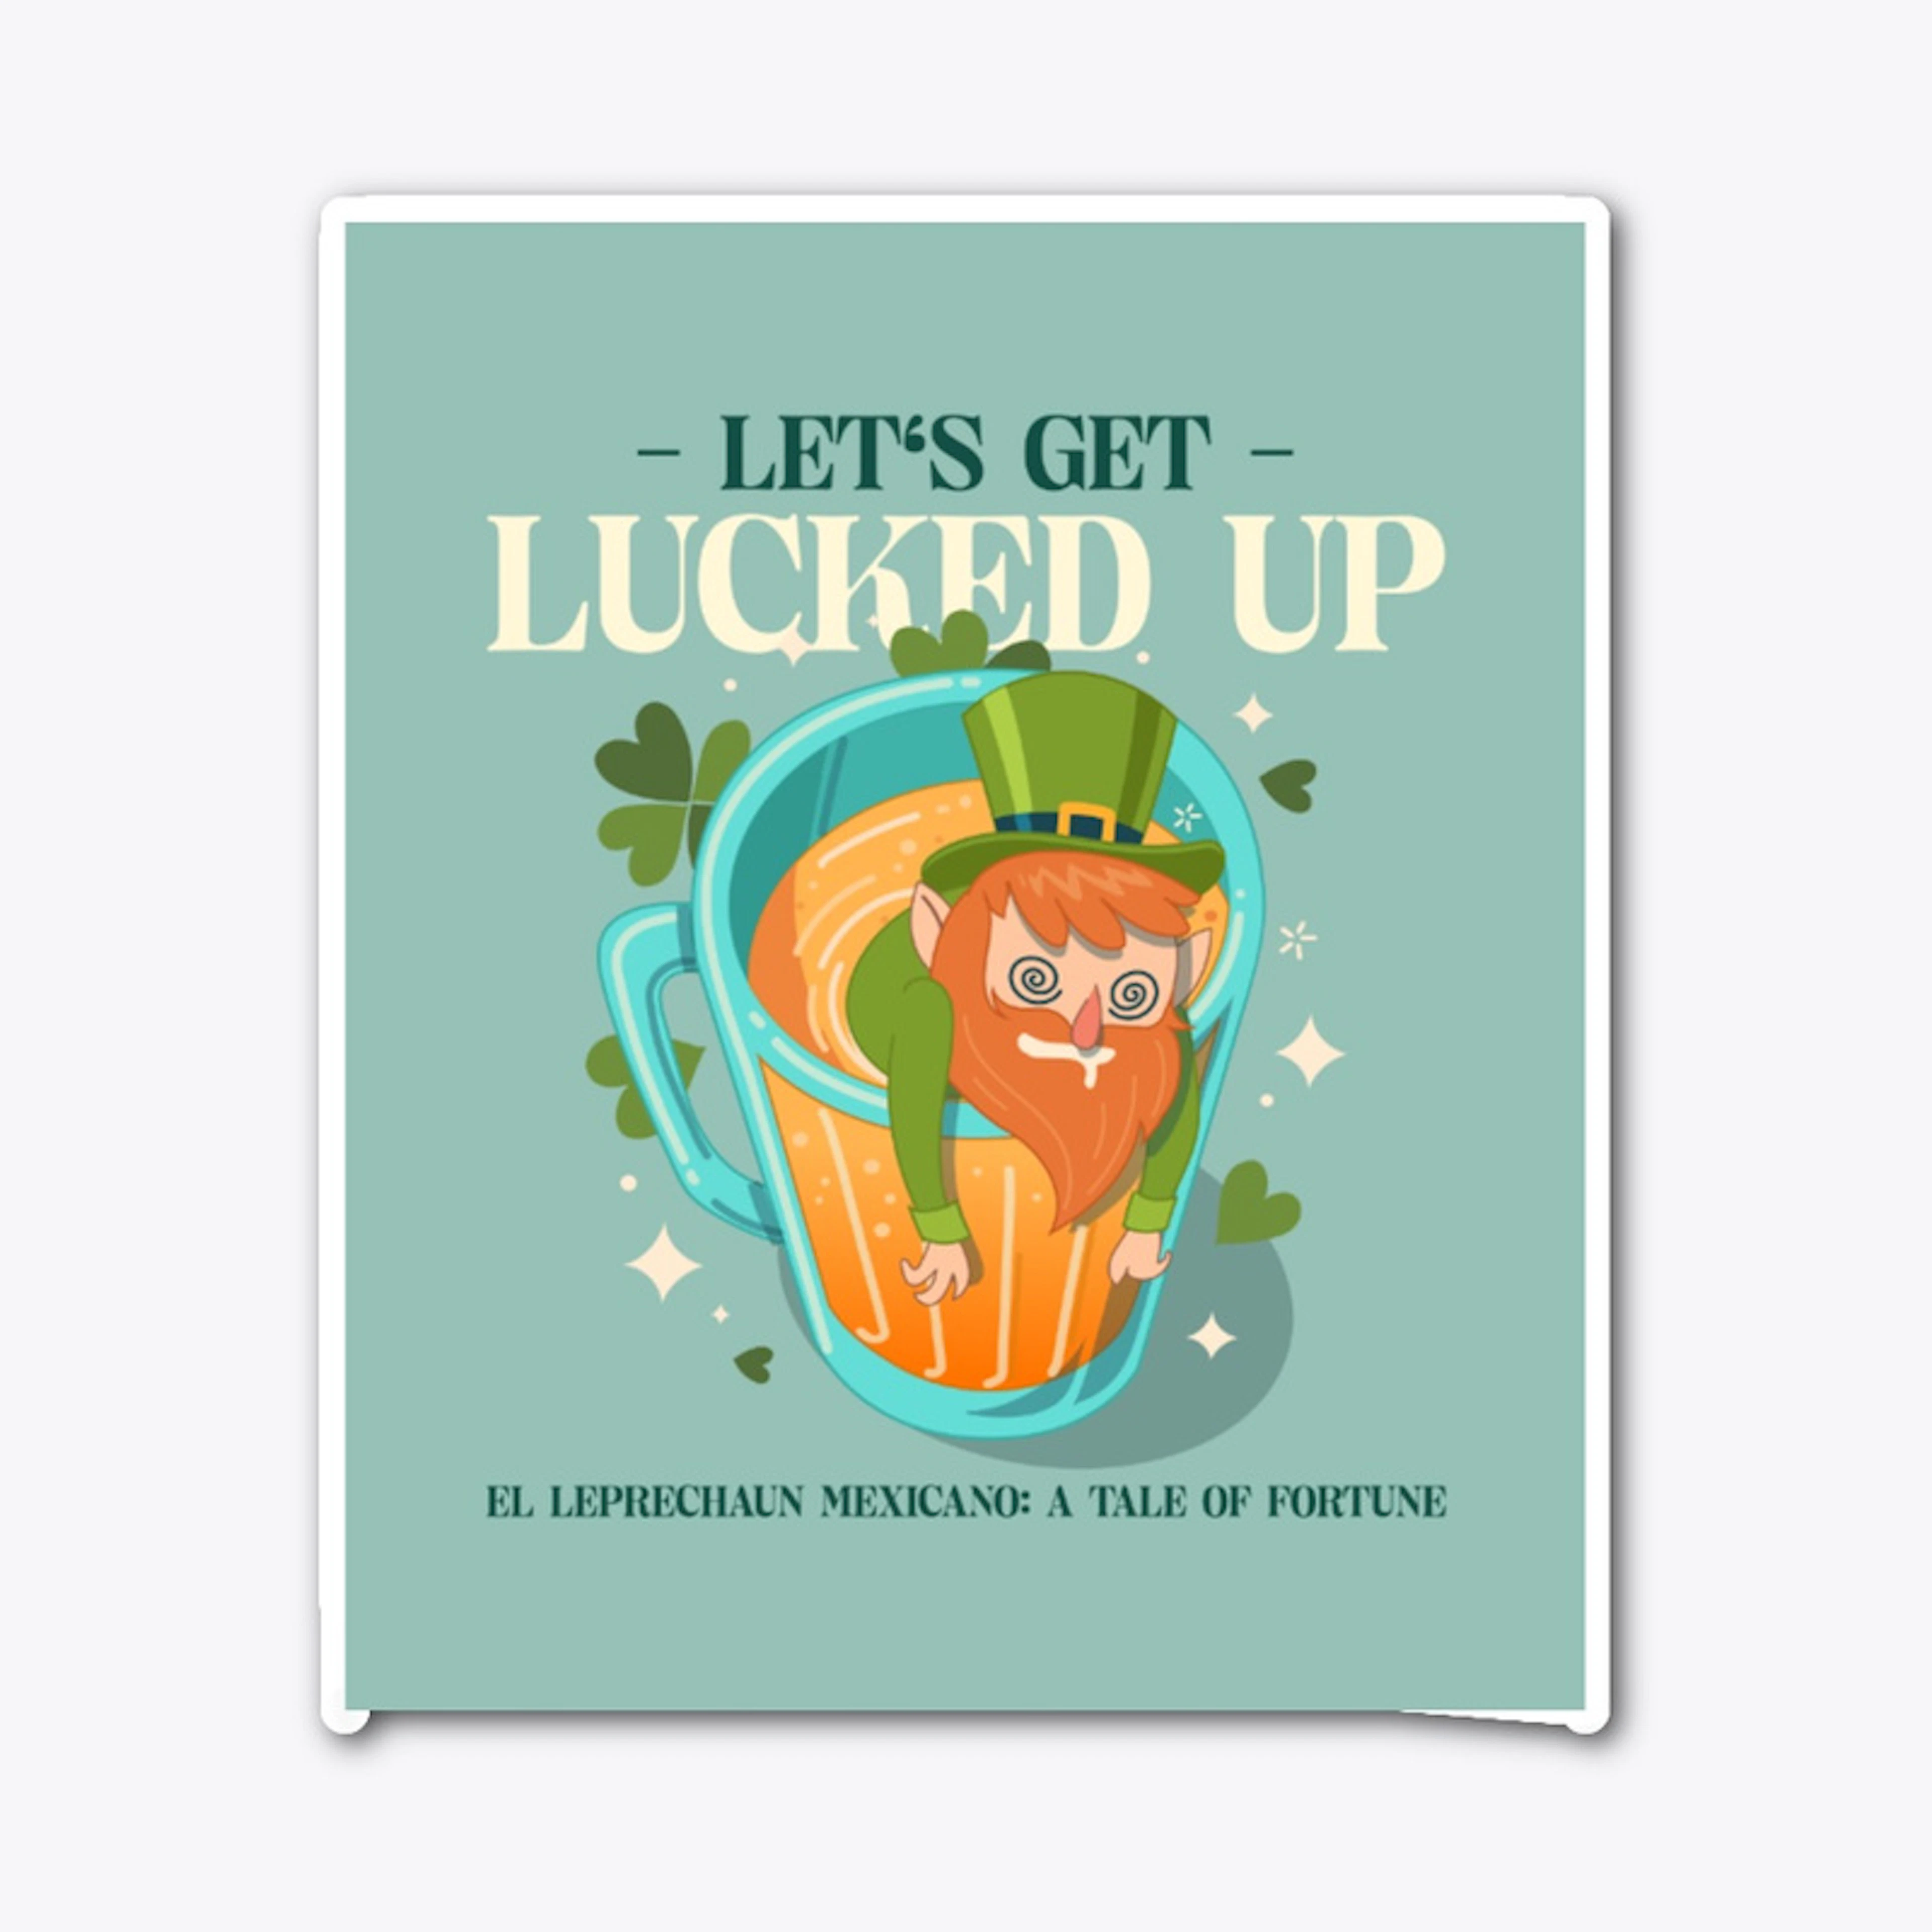 Let's Get Lucked Up!